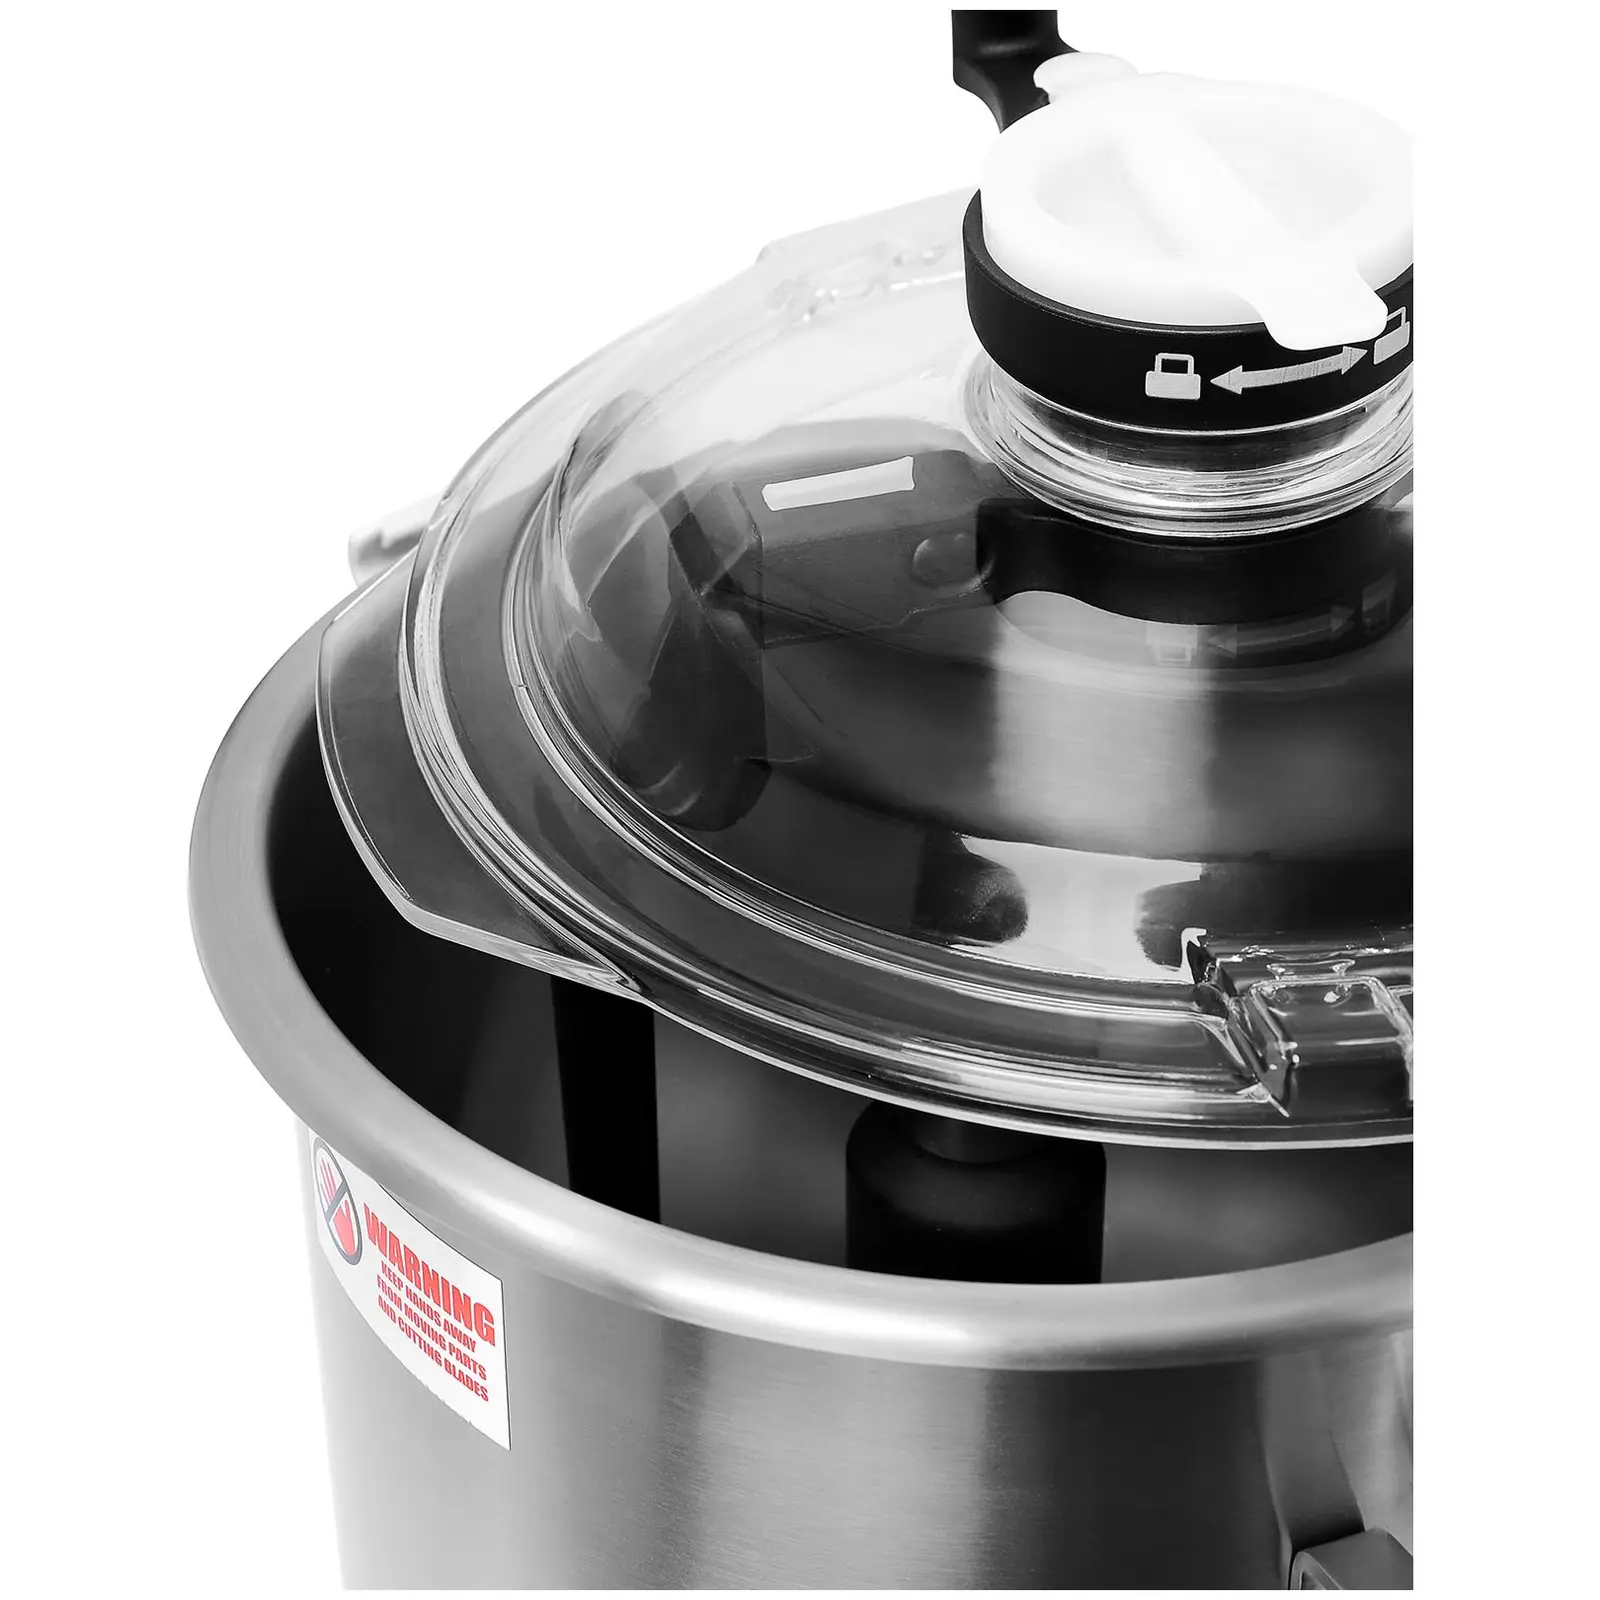 Occasion Cutter cuisine - 1500/2200 tr/min - Royal Catering - 12 l